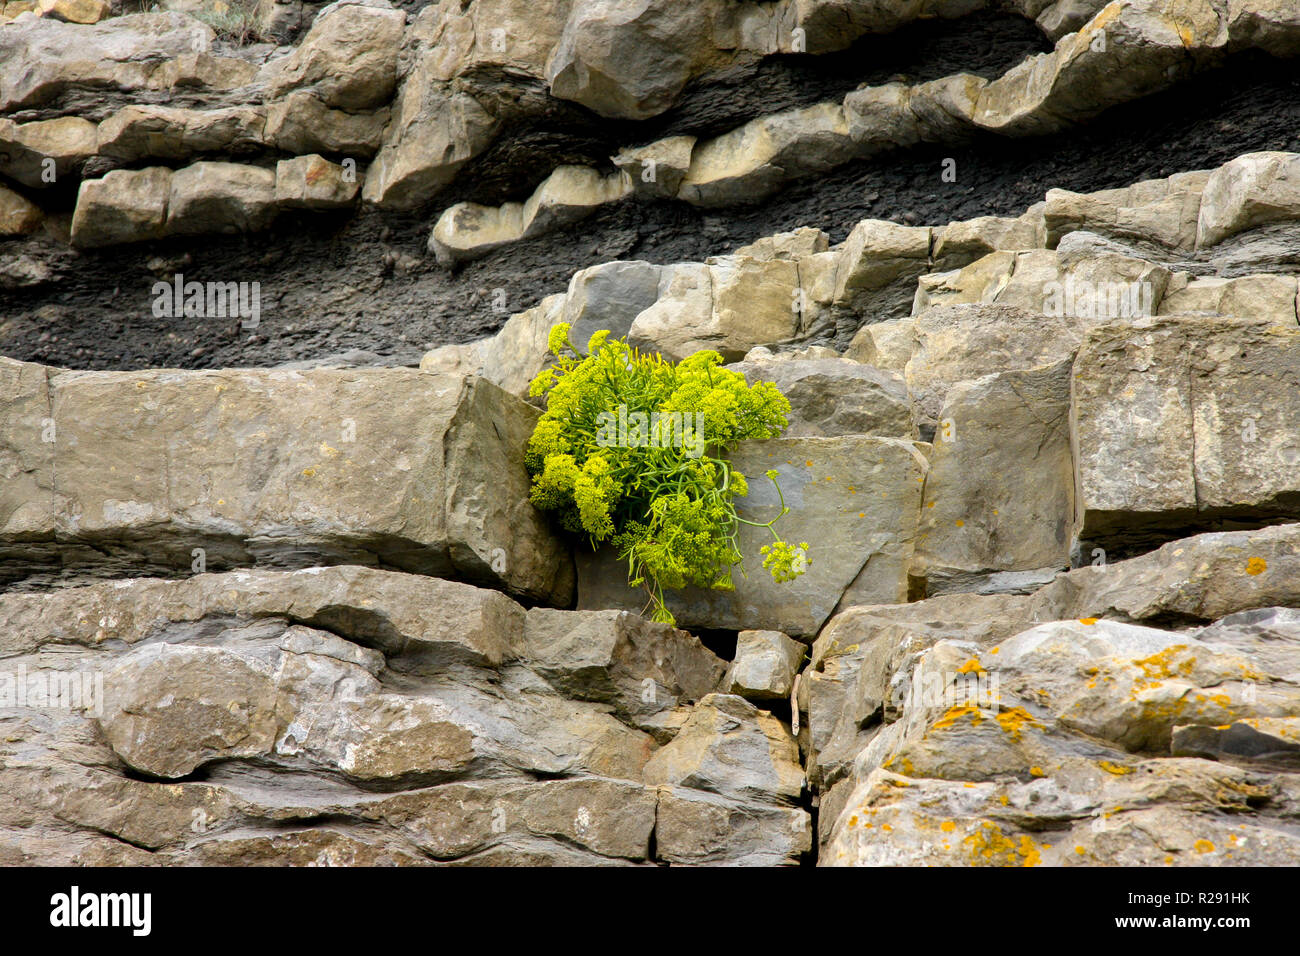 Layers of rock strata in the unstable cliff face at Nash Point, South Wales, UK Stock Photo